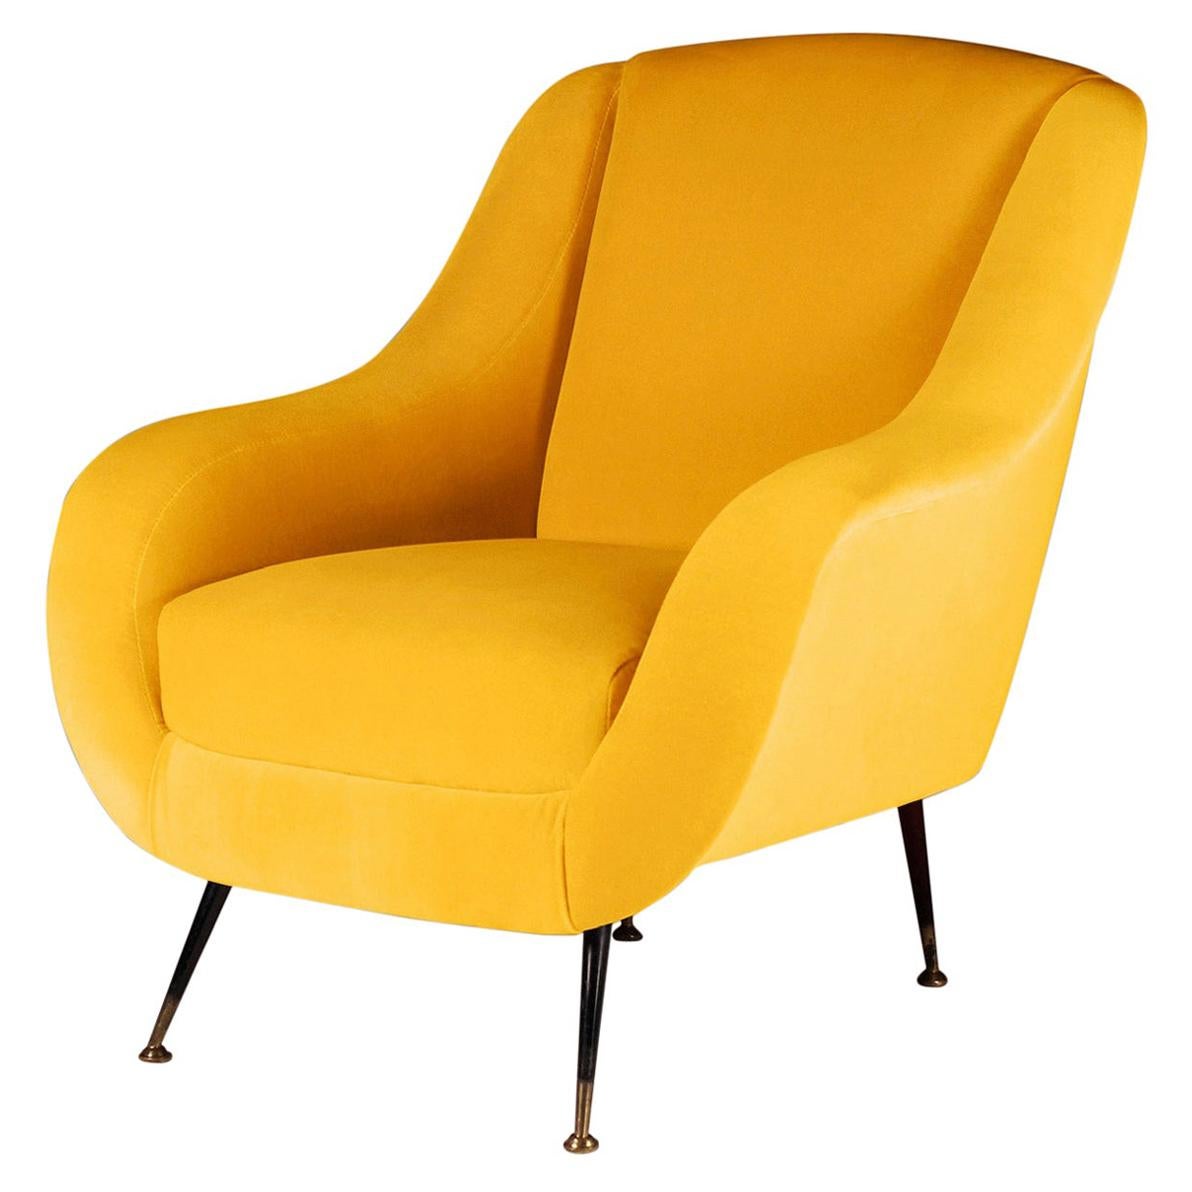 Pair of Mid-Century Modern Style Italian Lounge Chairs in Yellow